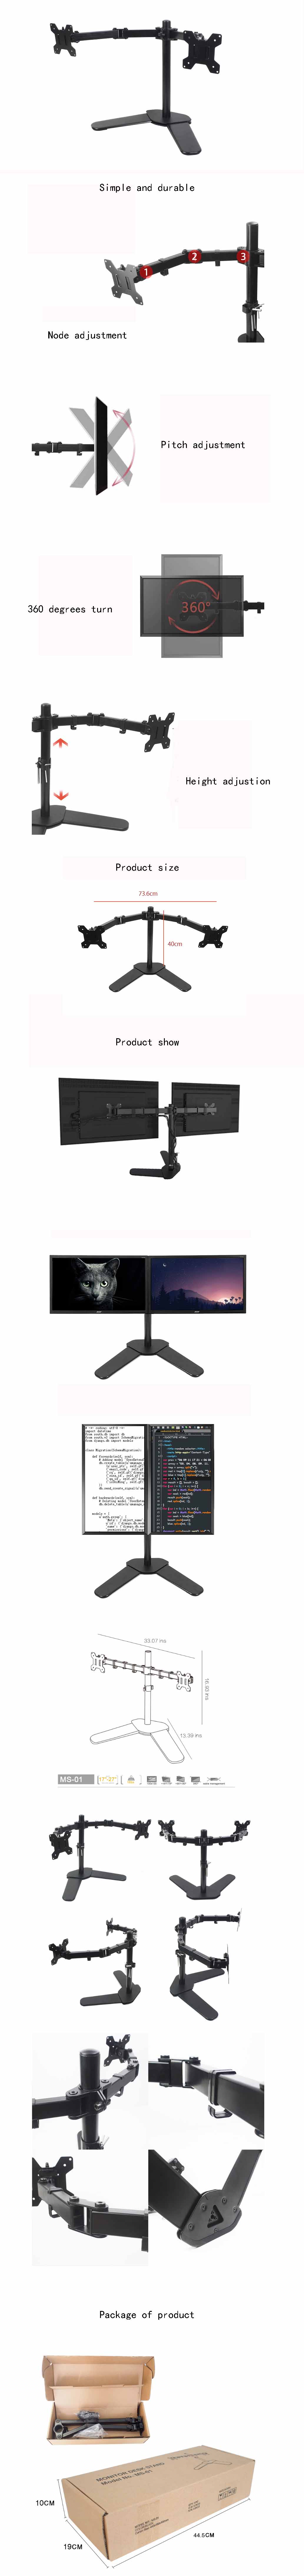 MS01-Dual-Arms-Monitor-Bracket-Monitor-Mount-Desktop-Computer-Stand-360-Degrees-Rotating-for-10--27--1452261-1